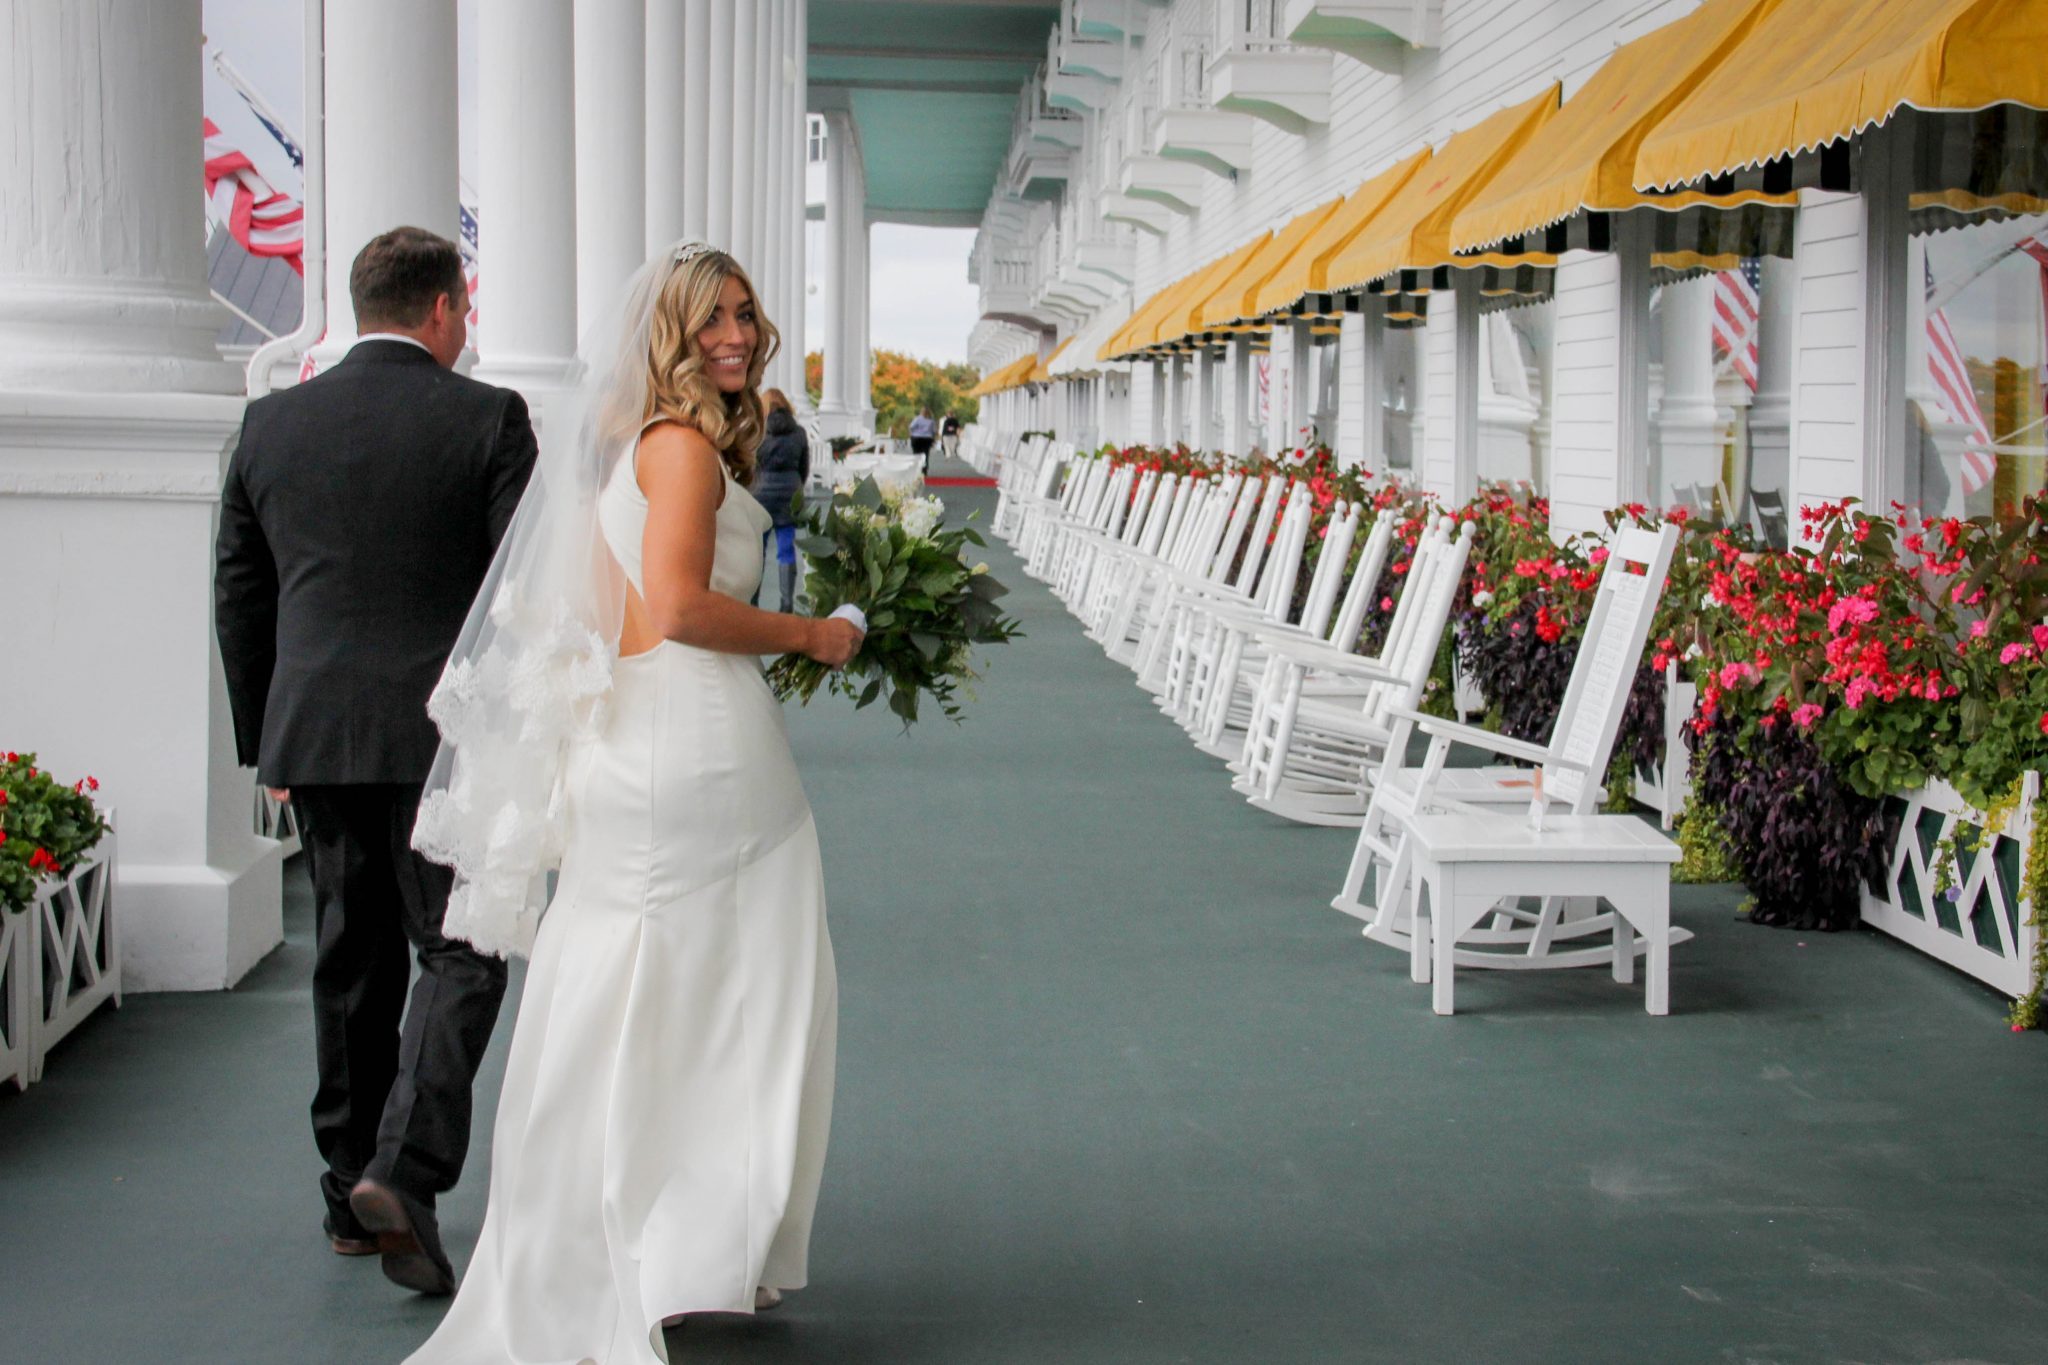 A Mackinac Island bride strolls down the front porch of historic Grand Hotel, one of many Mackinac Island wedding venues.